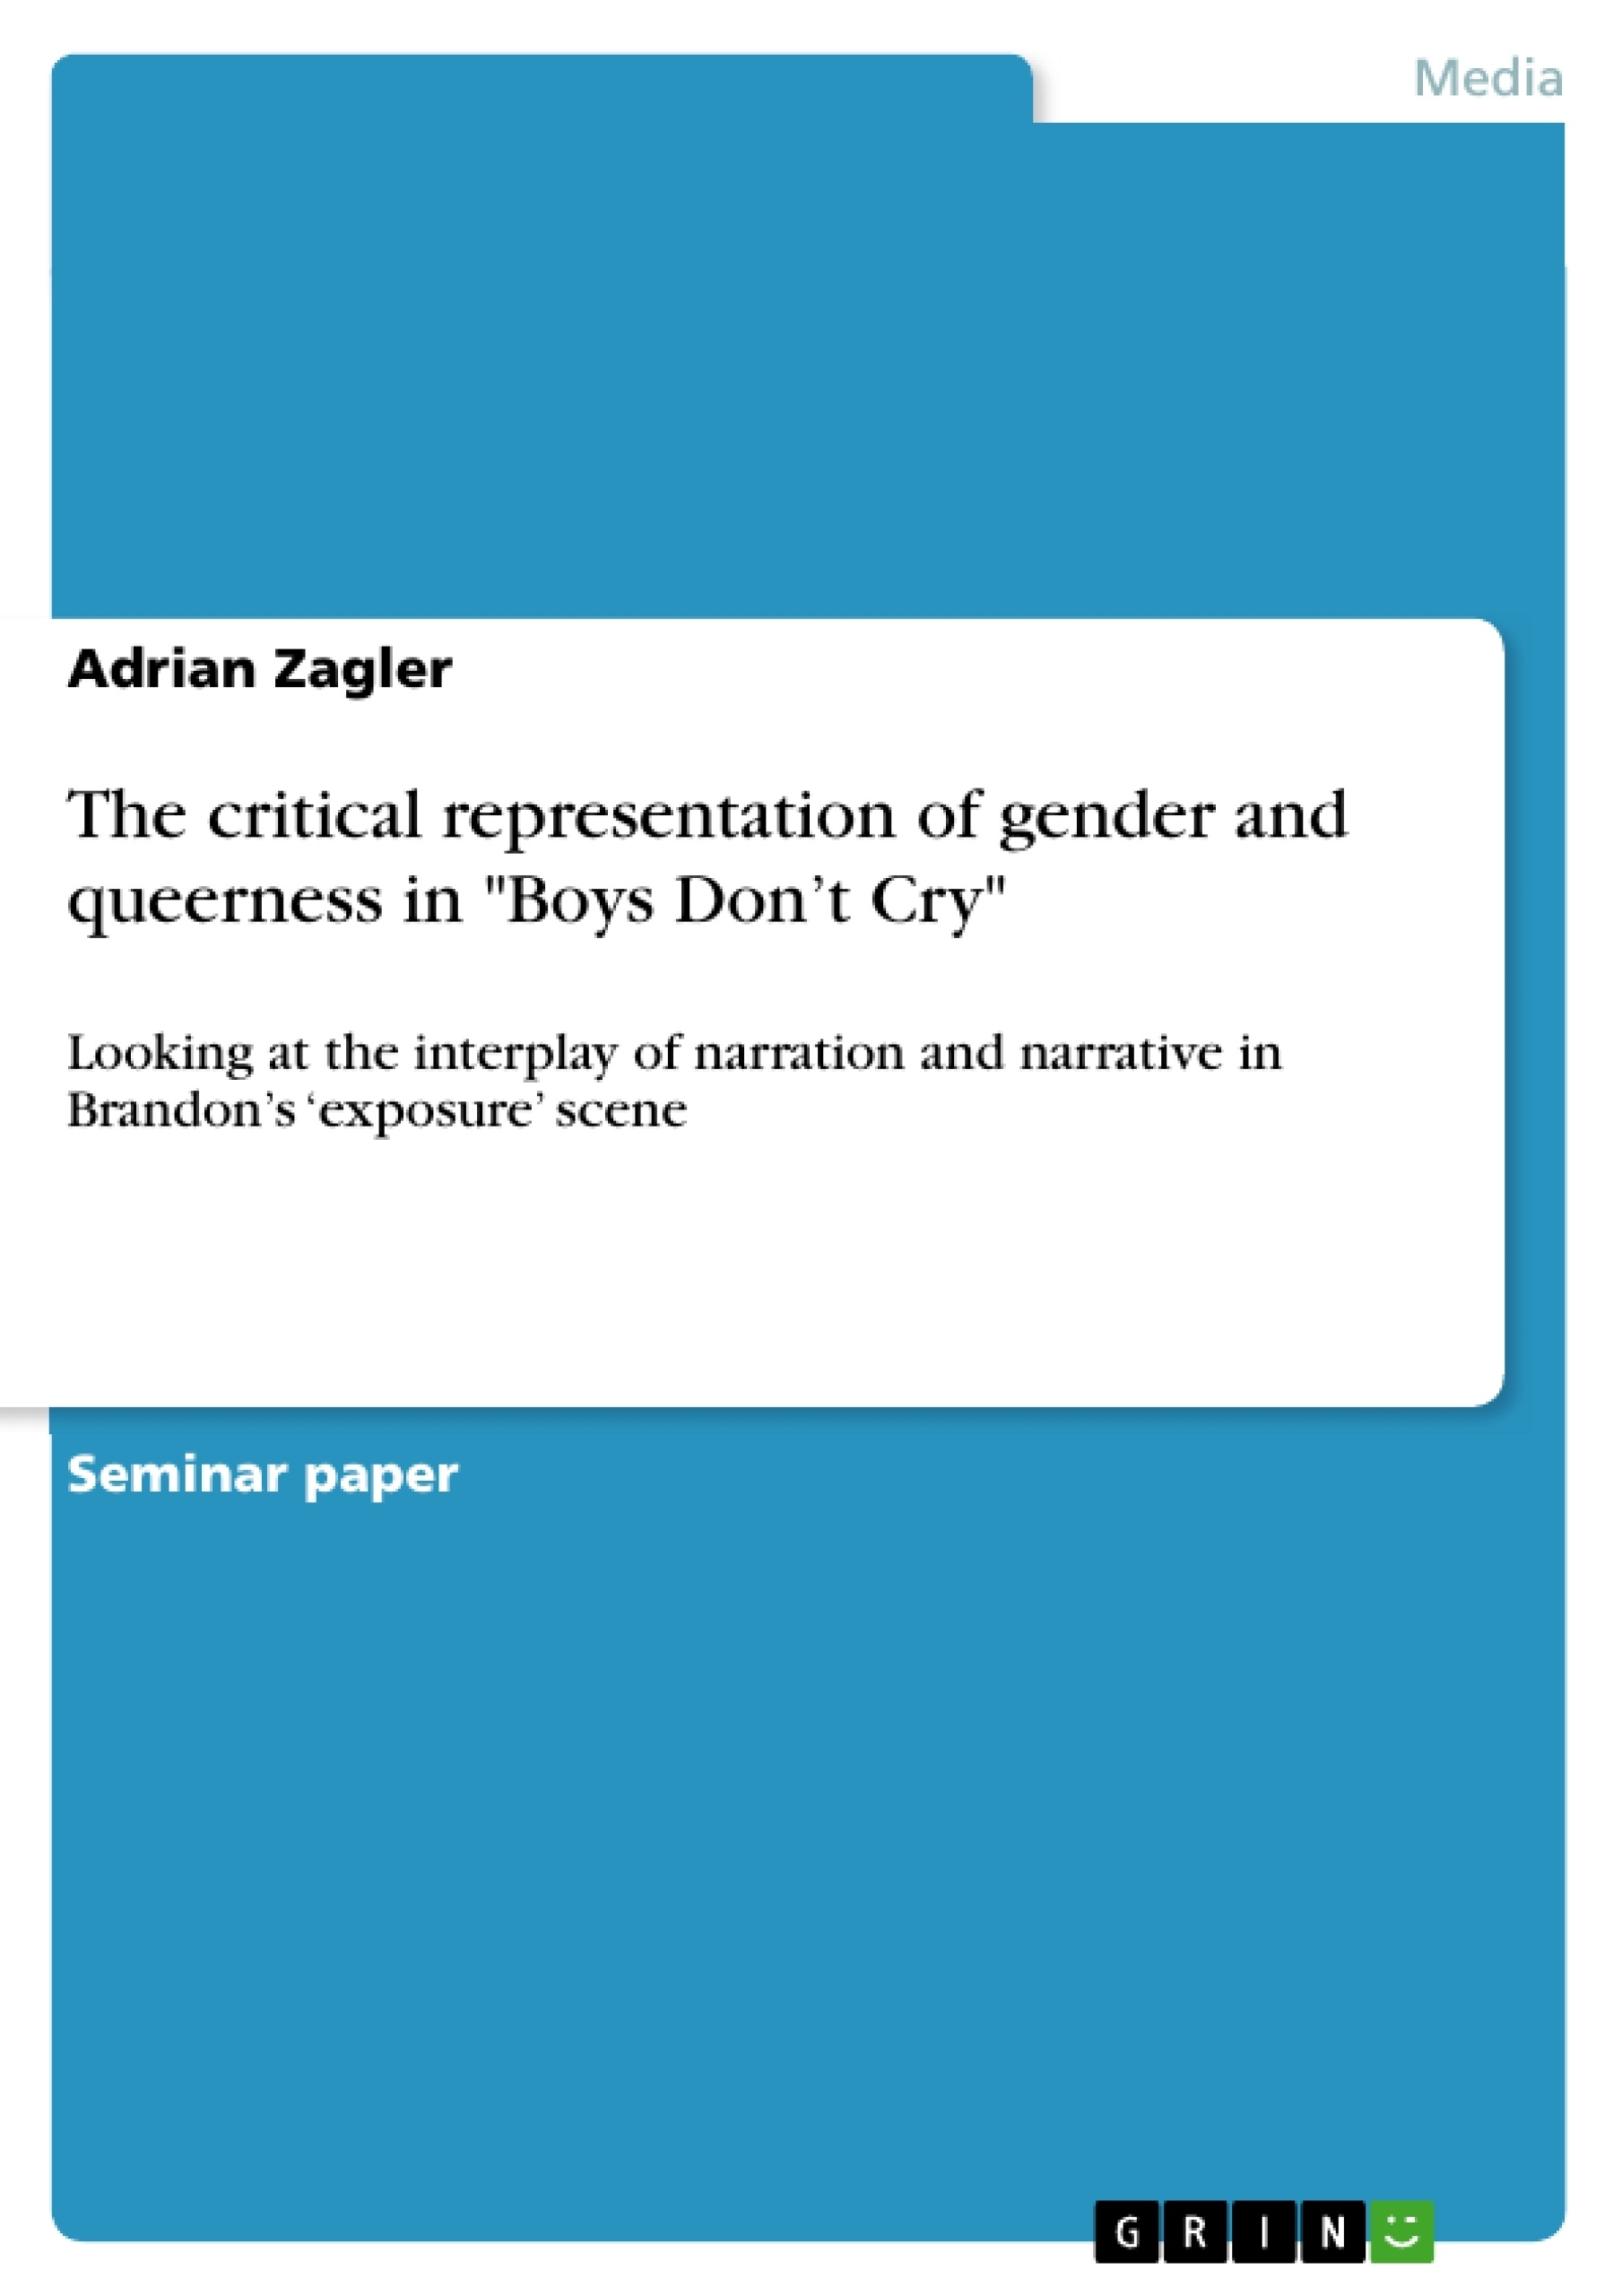 Title: The critical representation of gender and queerness in "Boys Don’t Cry"